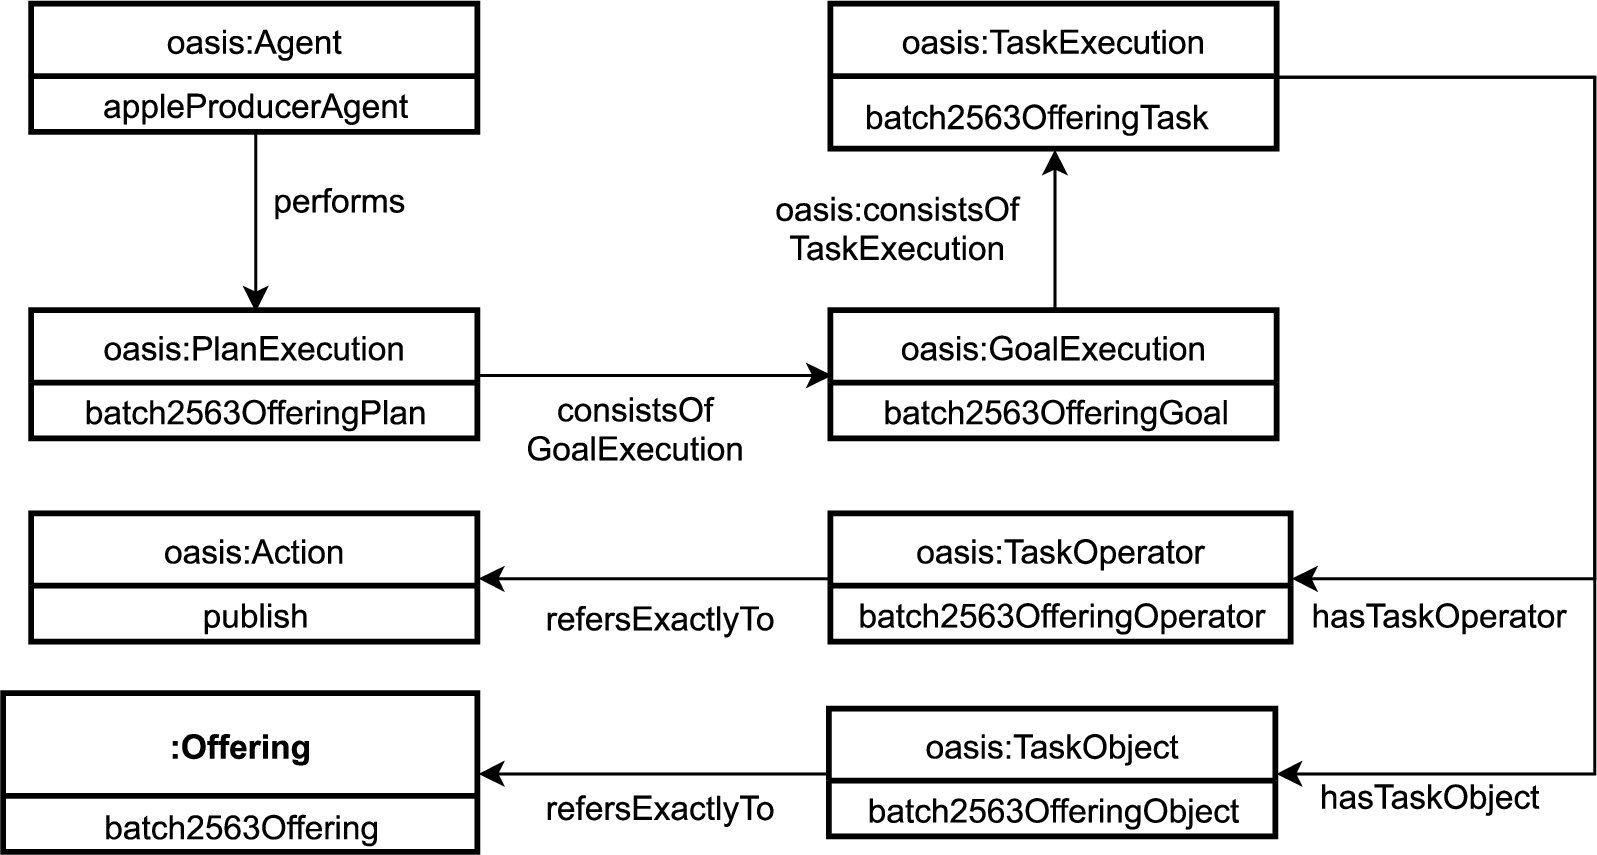 UML diagram exemplifying the publication of an offering for apple batch 2563 in the OC-Commerce ontology.